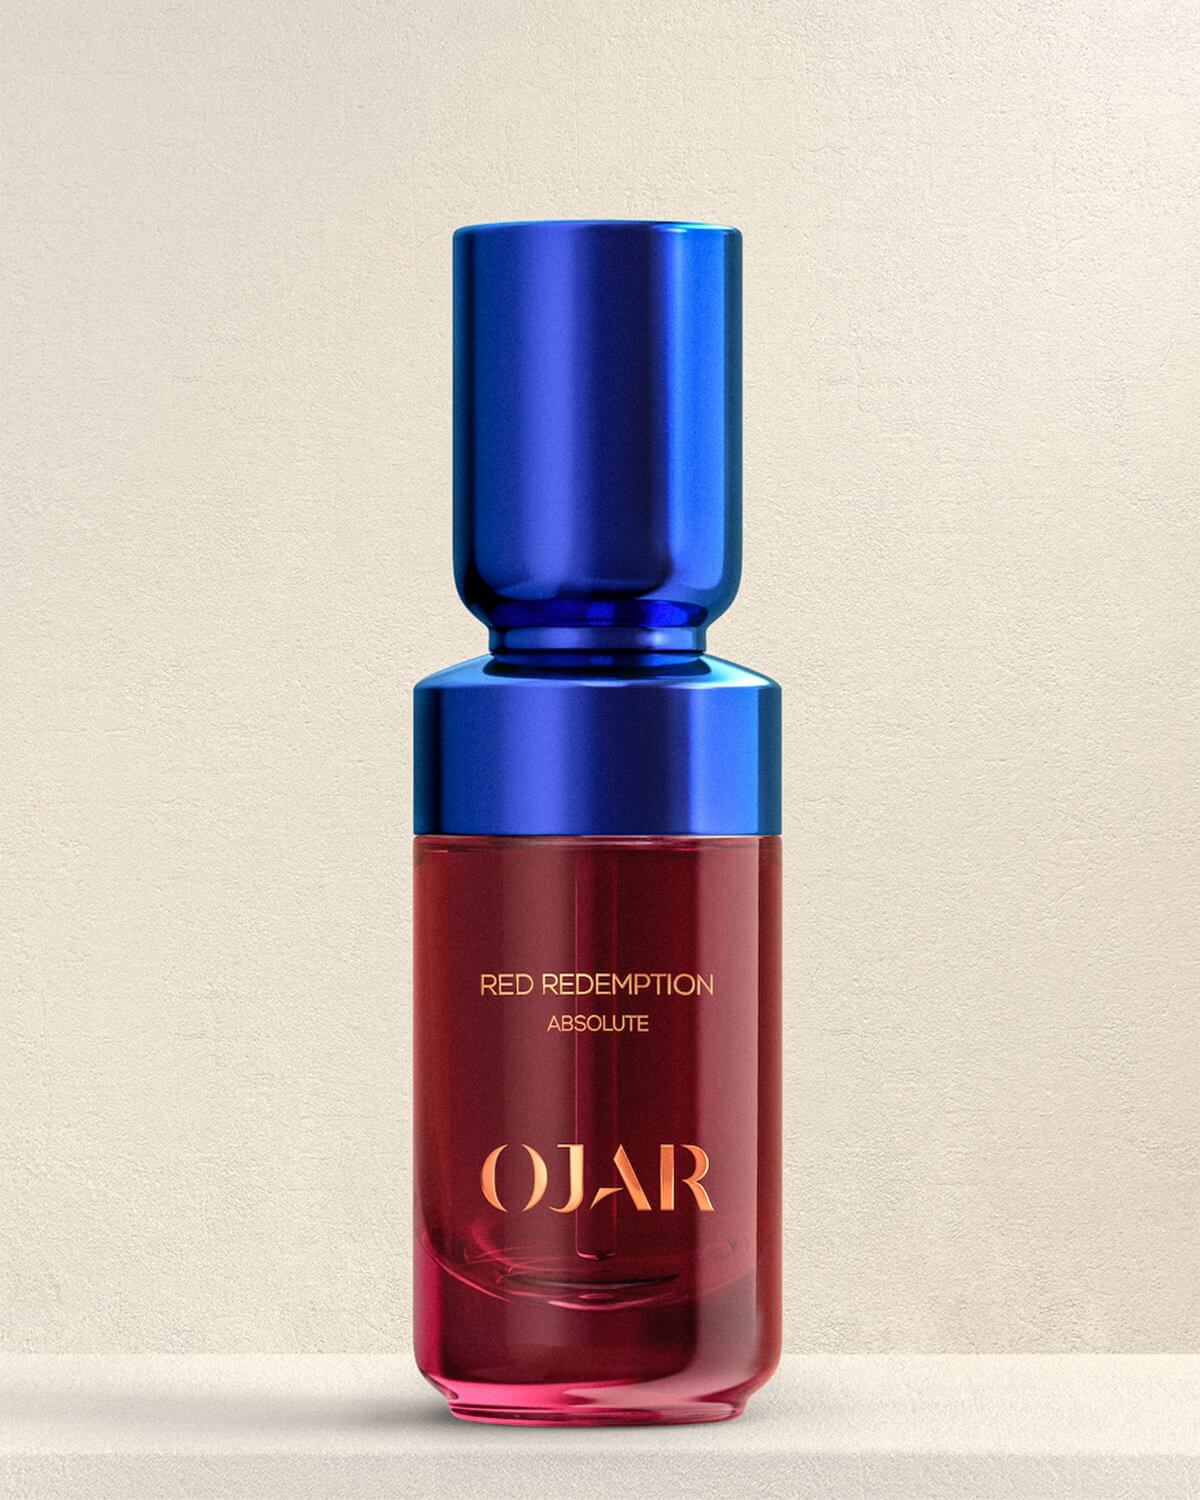 OJAR Absolute Red Redemption Perfume